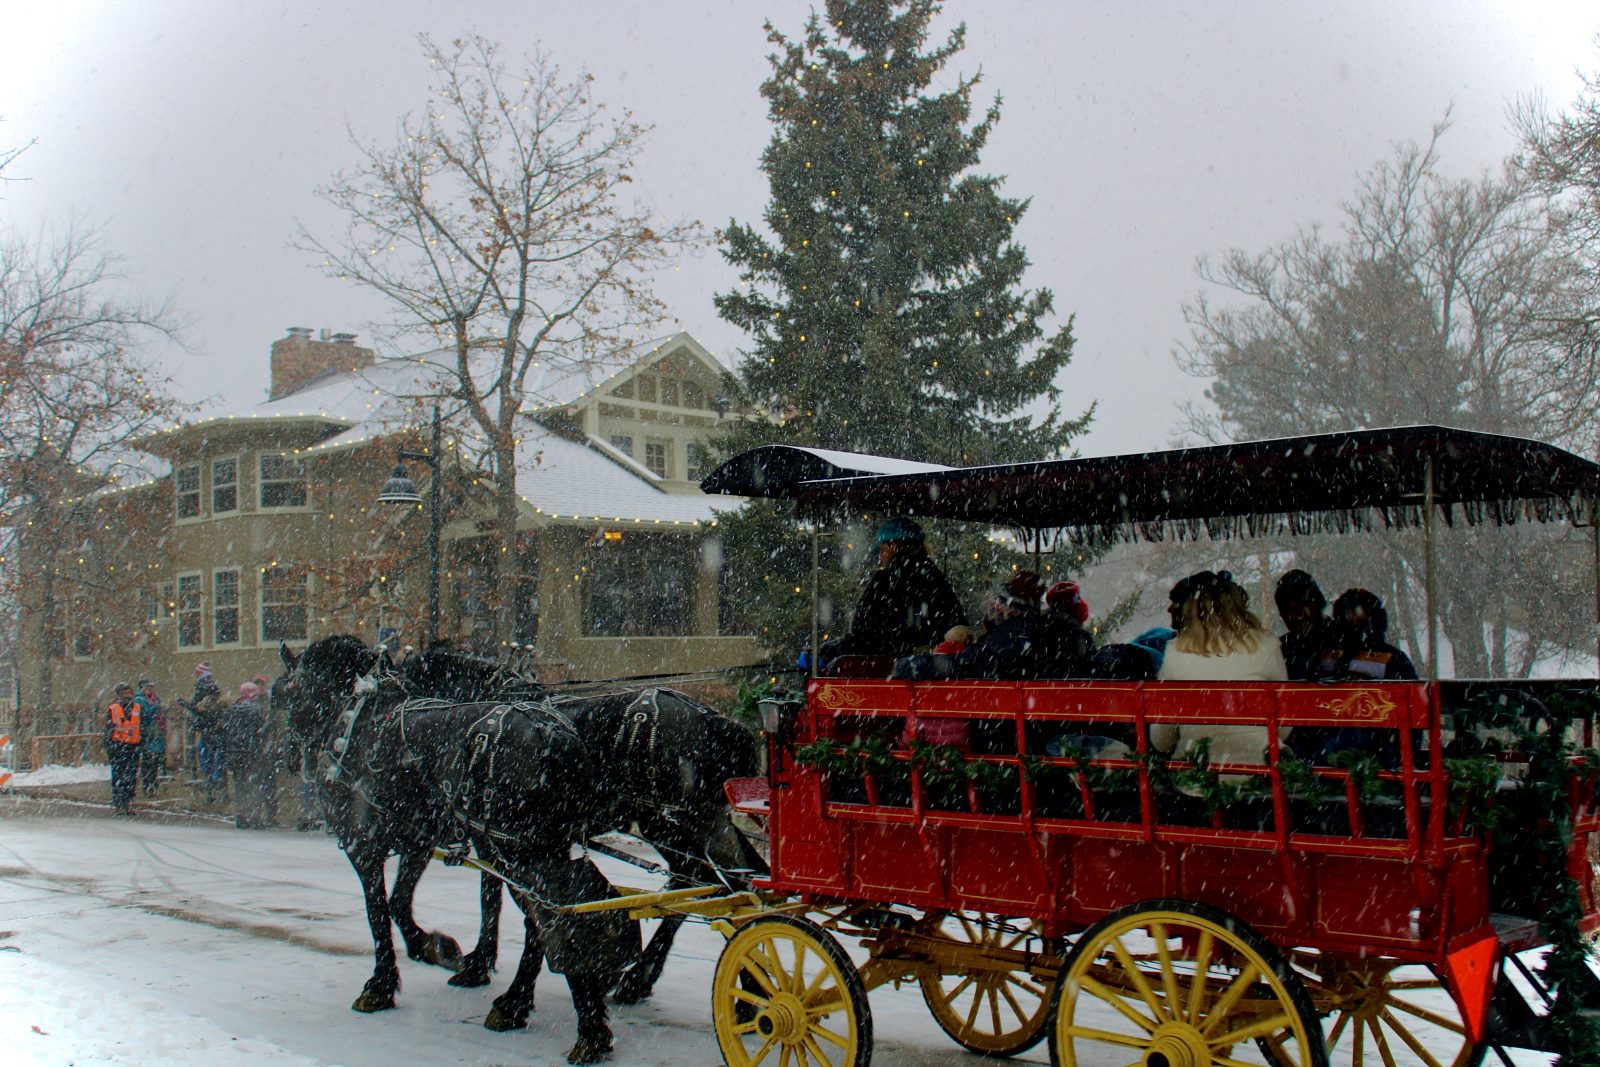 Horse drawn carriage carrying group through snow